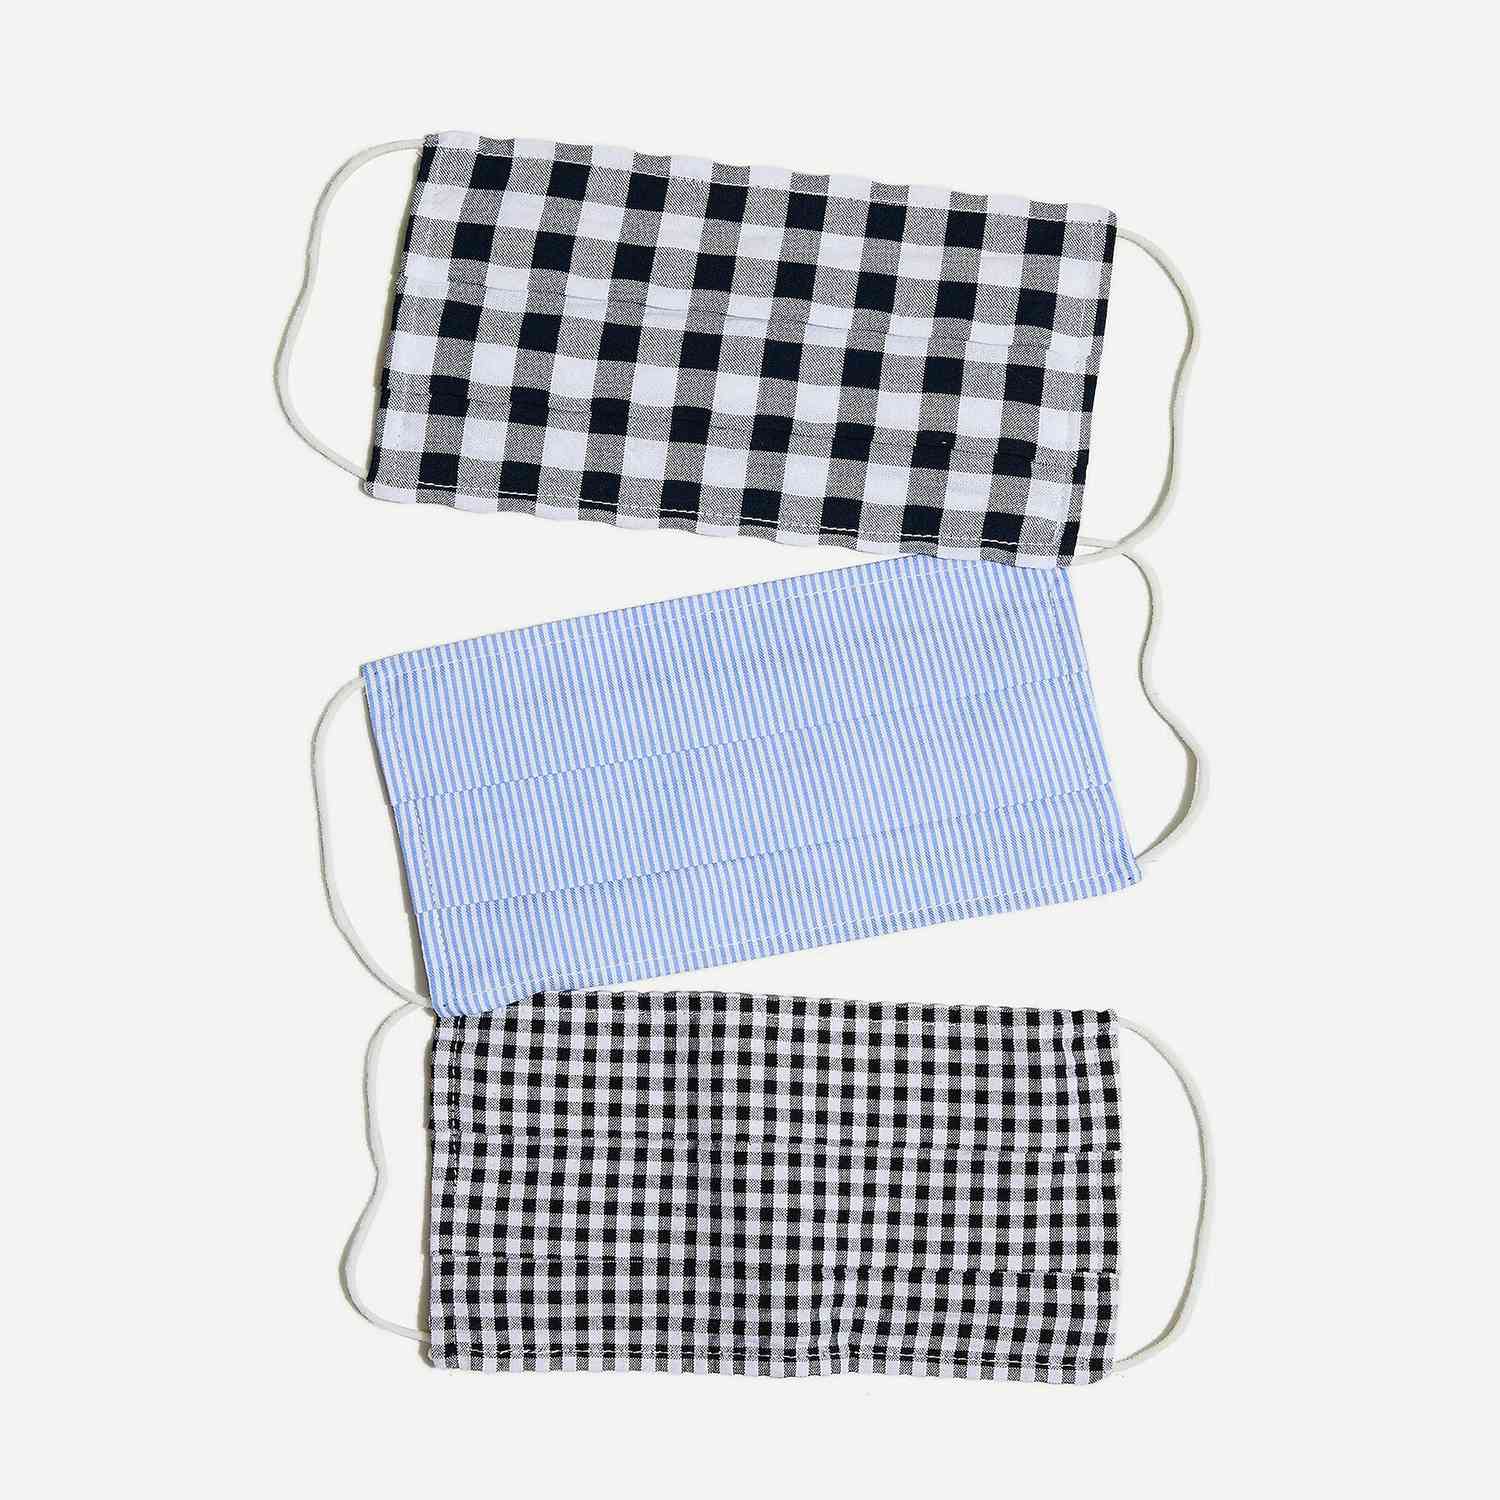 JCrew Pack of three nonmedical face masks in mixed prints